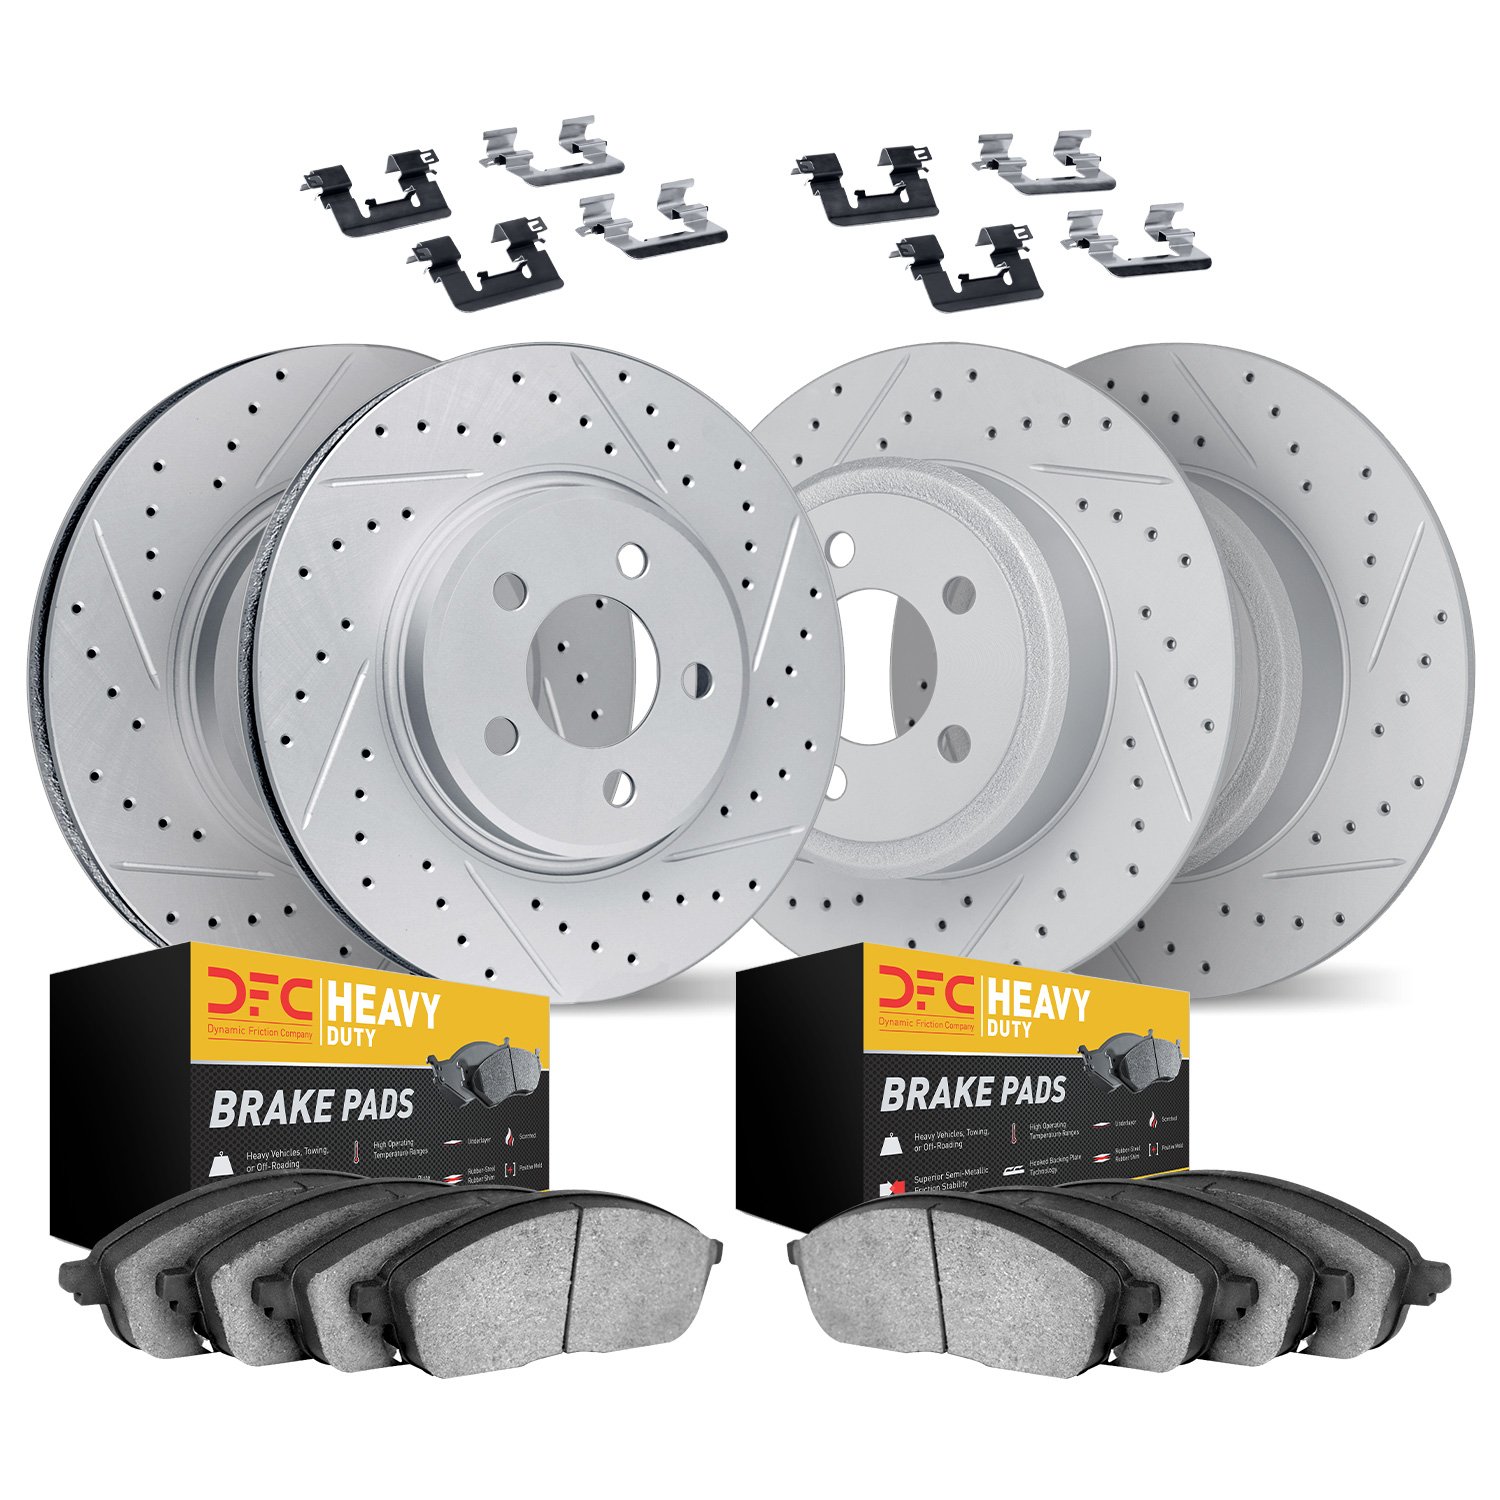 2214-99058 Geoperformance Drilled/Slotted Rotors w/Heavy-Duty Pads Kit & Hardware, 1999-2004 Ford/Lincoln/Mercury/Mazda, Positio